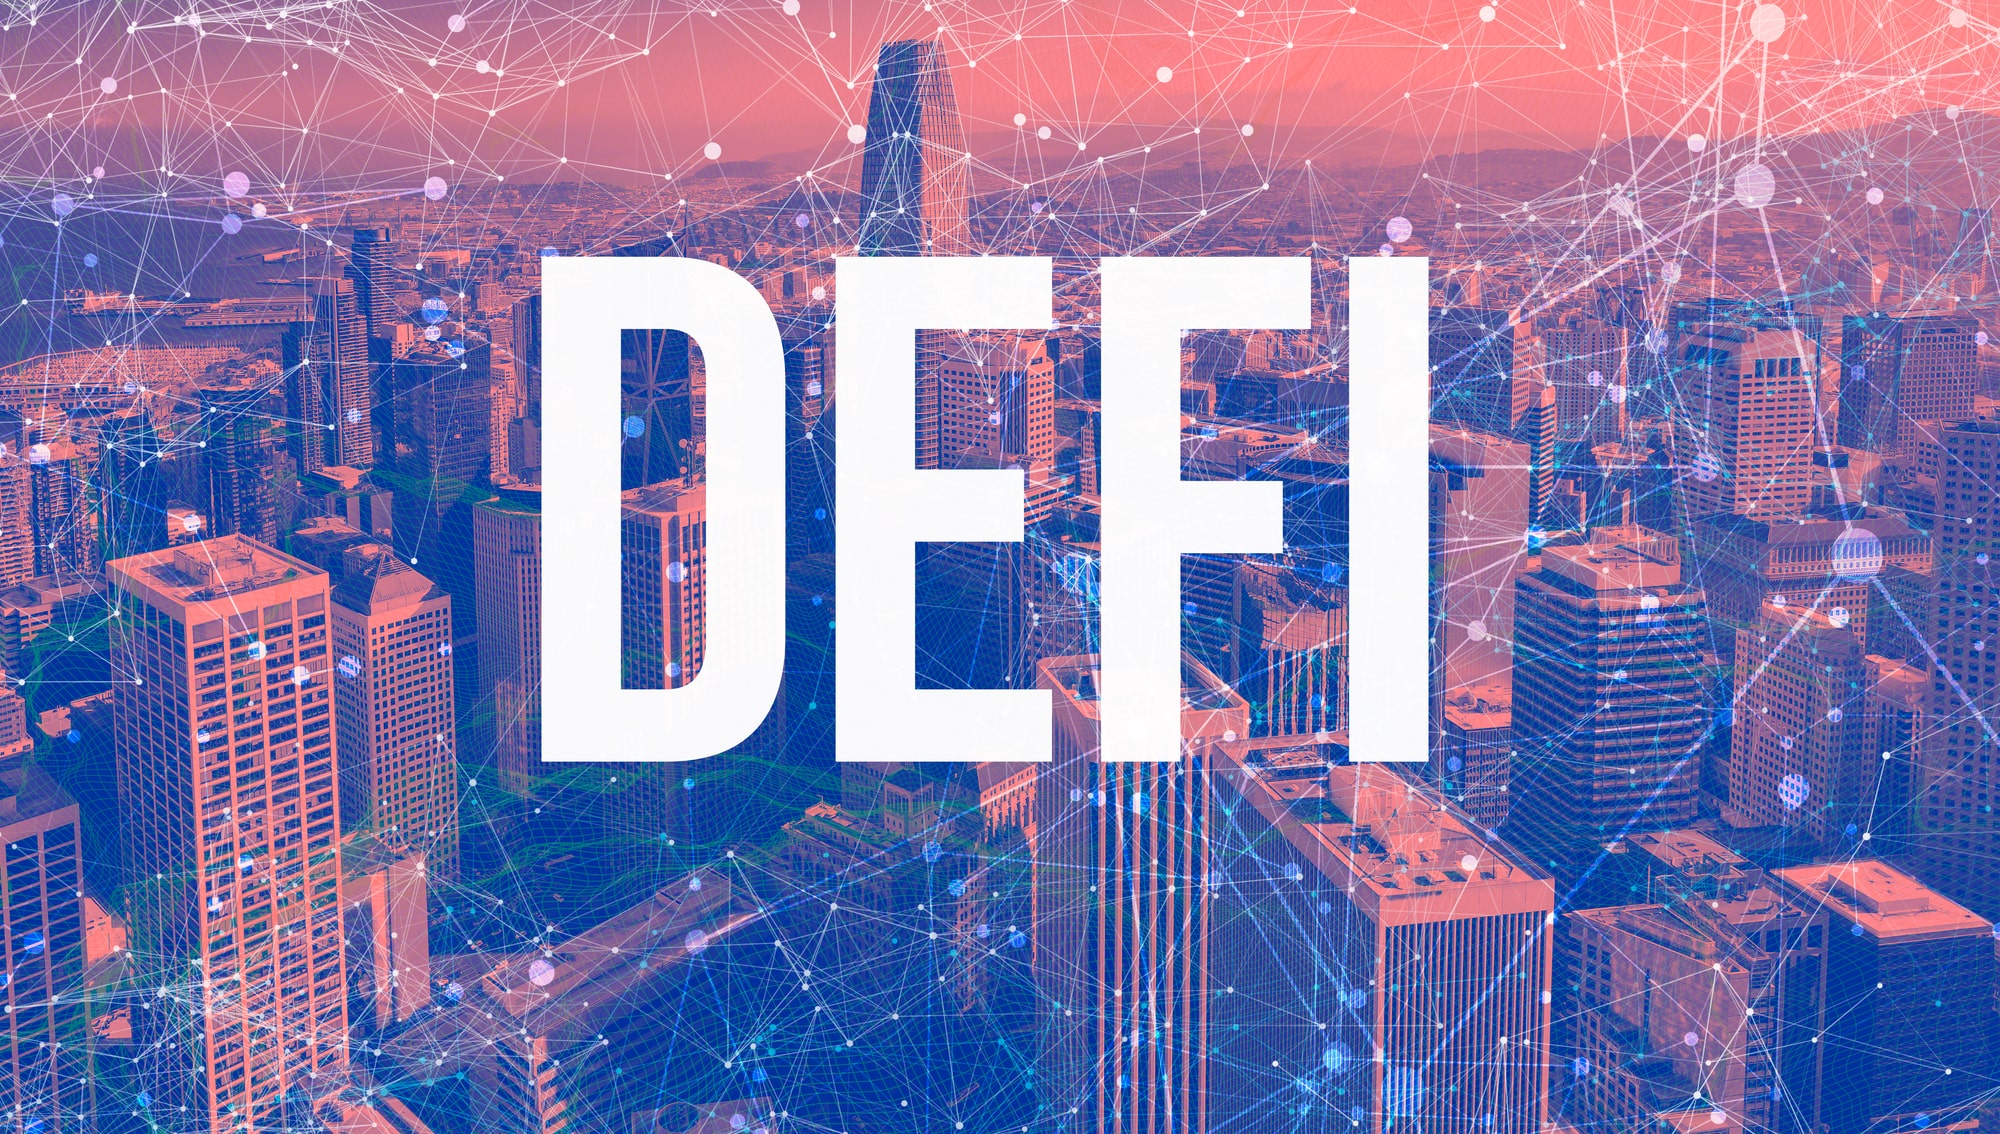 Money Leaving Defi Sector As Cryptocurrency Falls And Market Loses Its Gloss